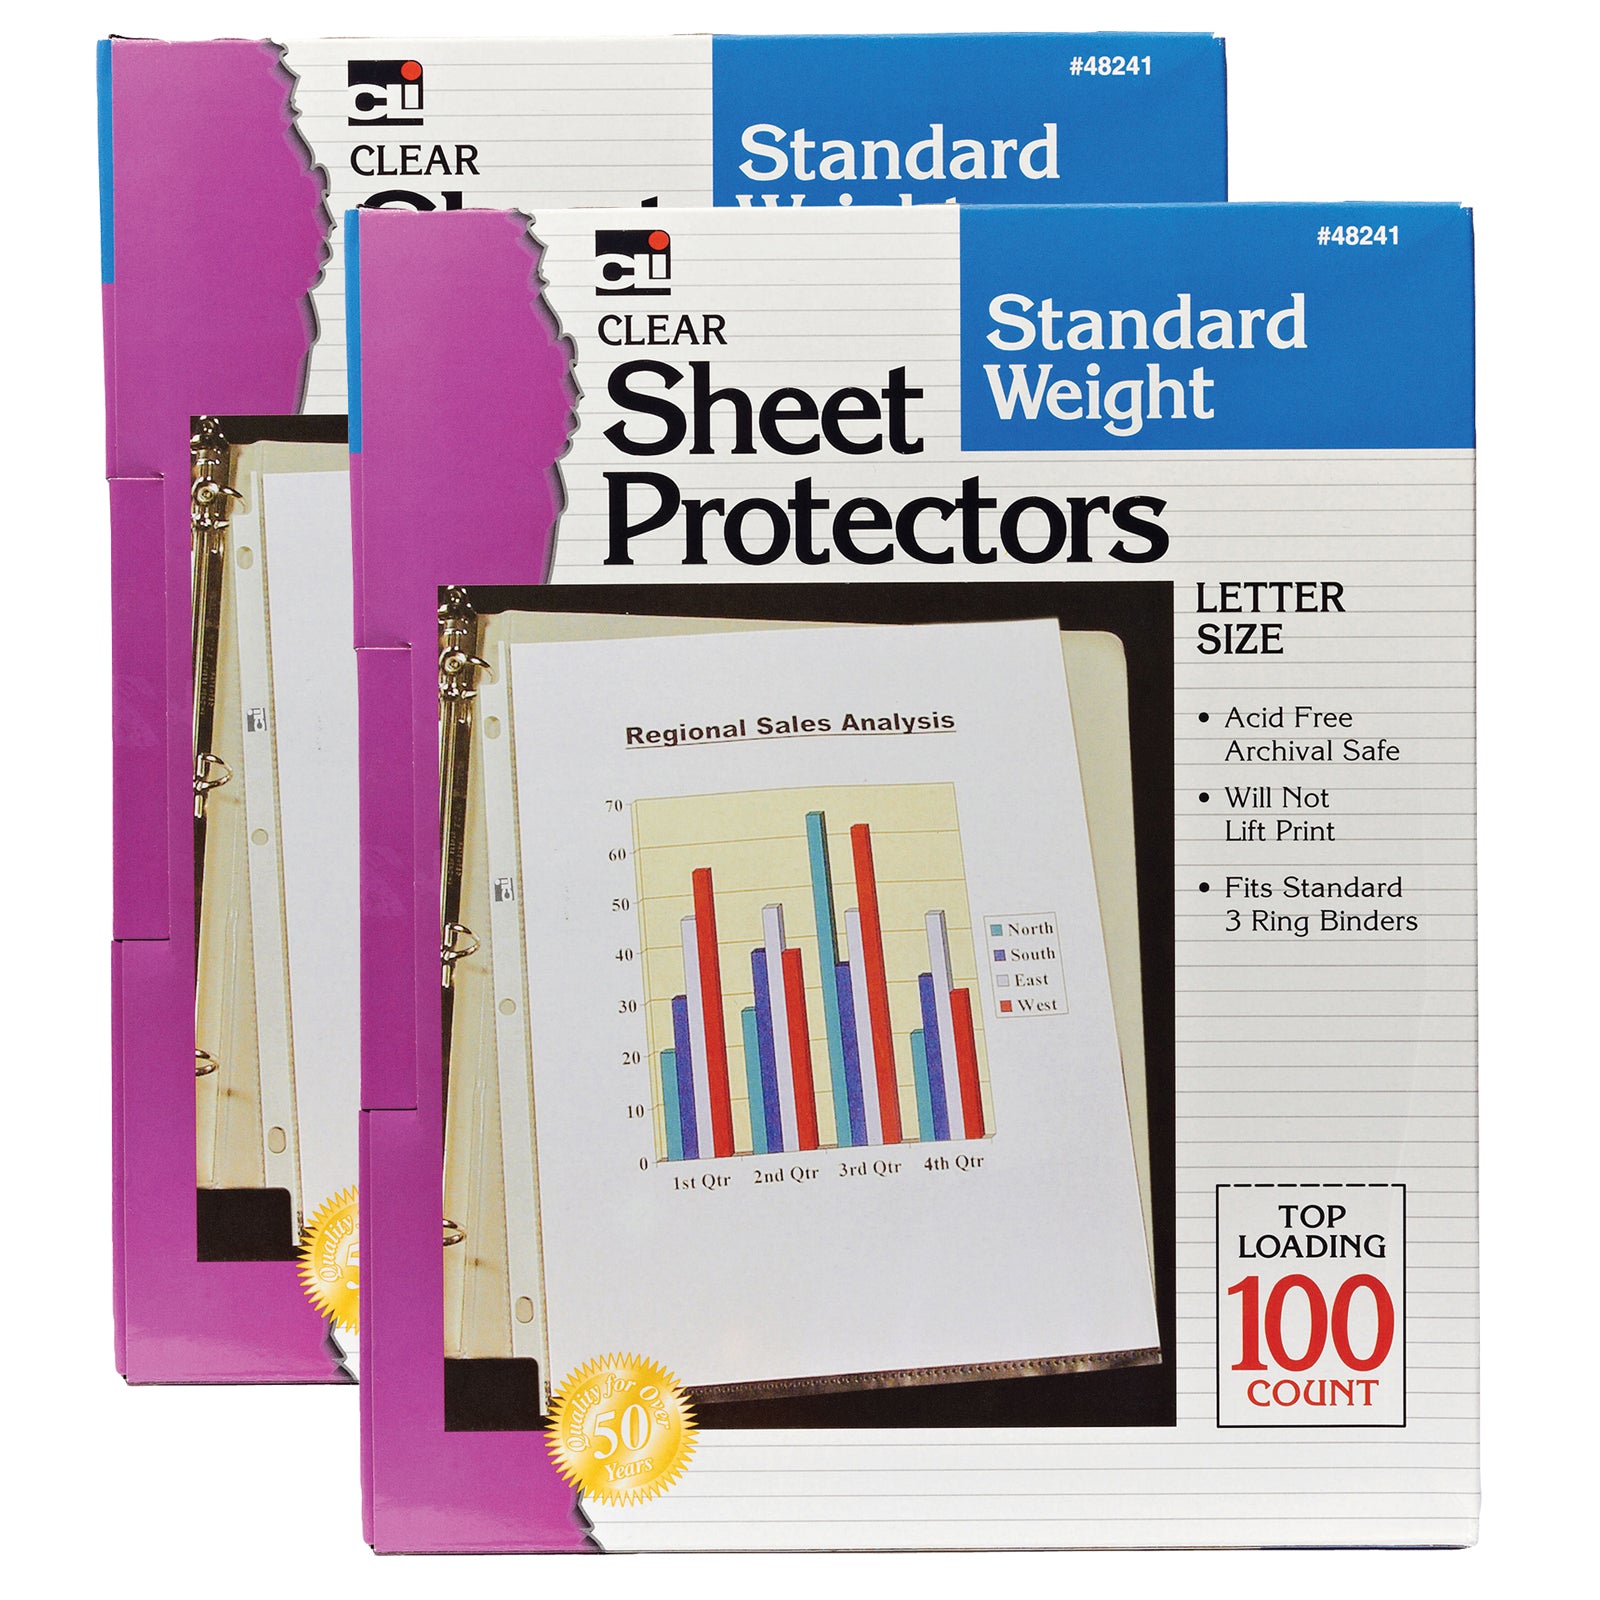 Sheet Protectors, Clear, Standard Weight, Letter Size, 100 Per Box, 2 Boxes - A1 School Supplies